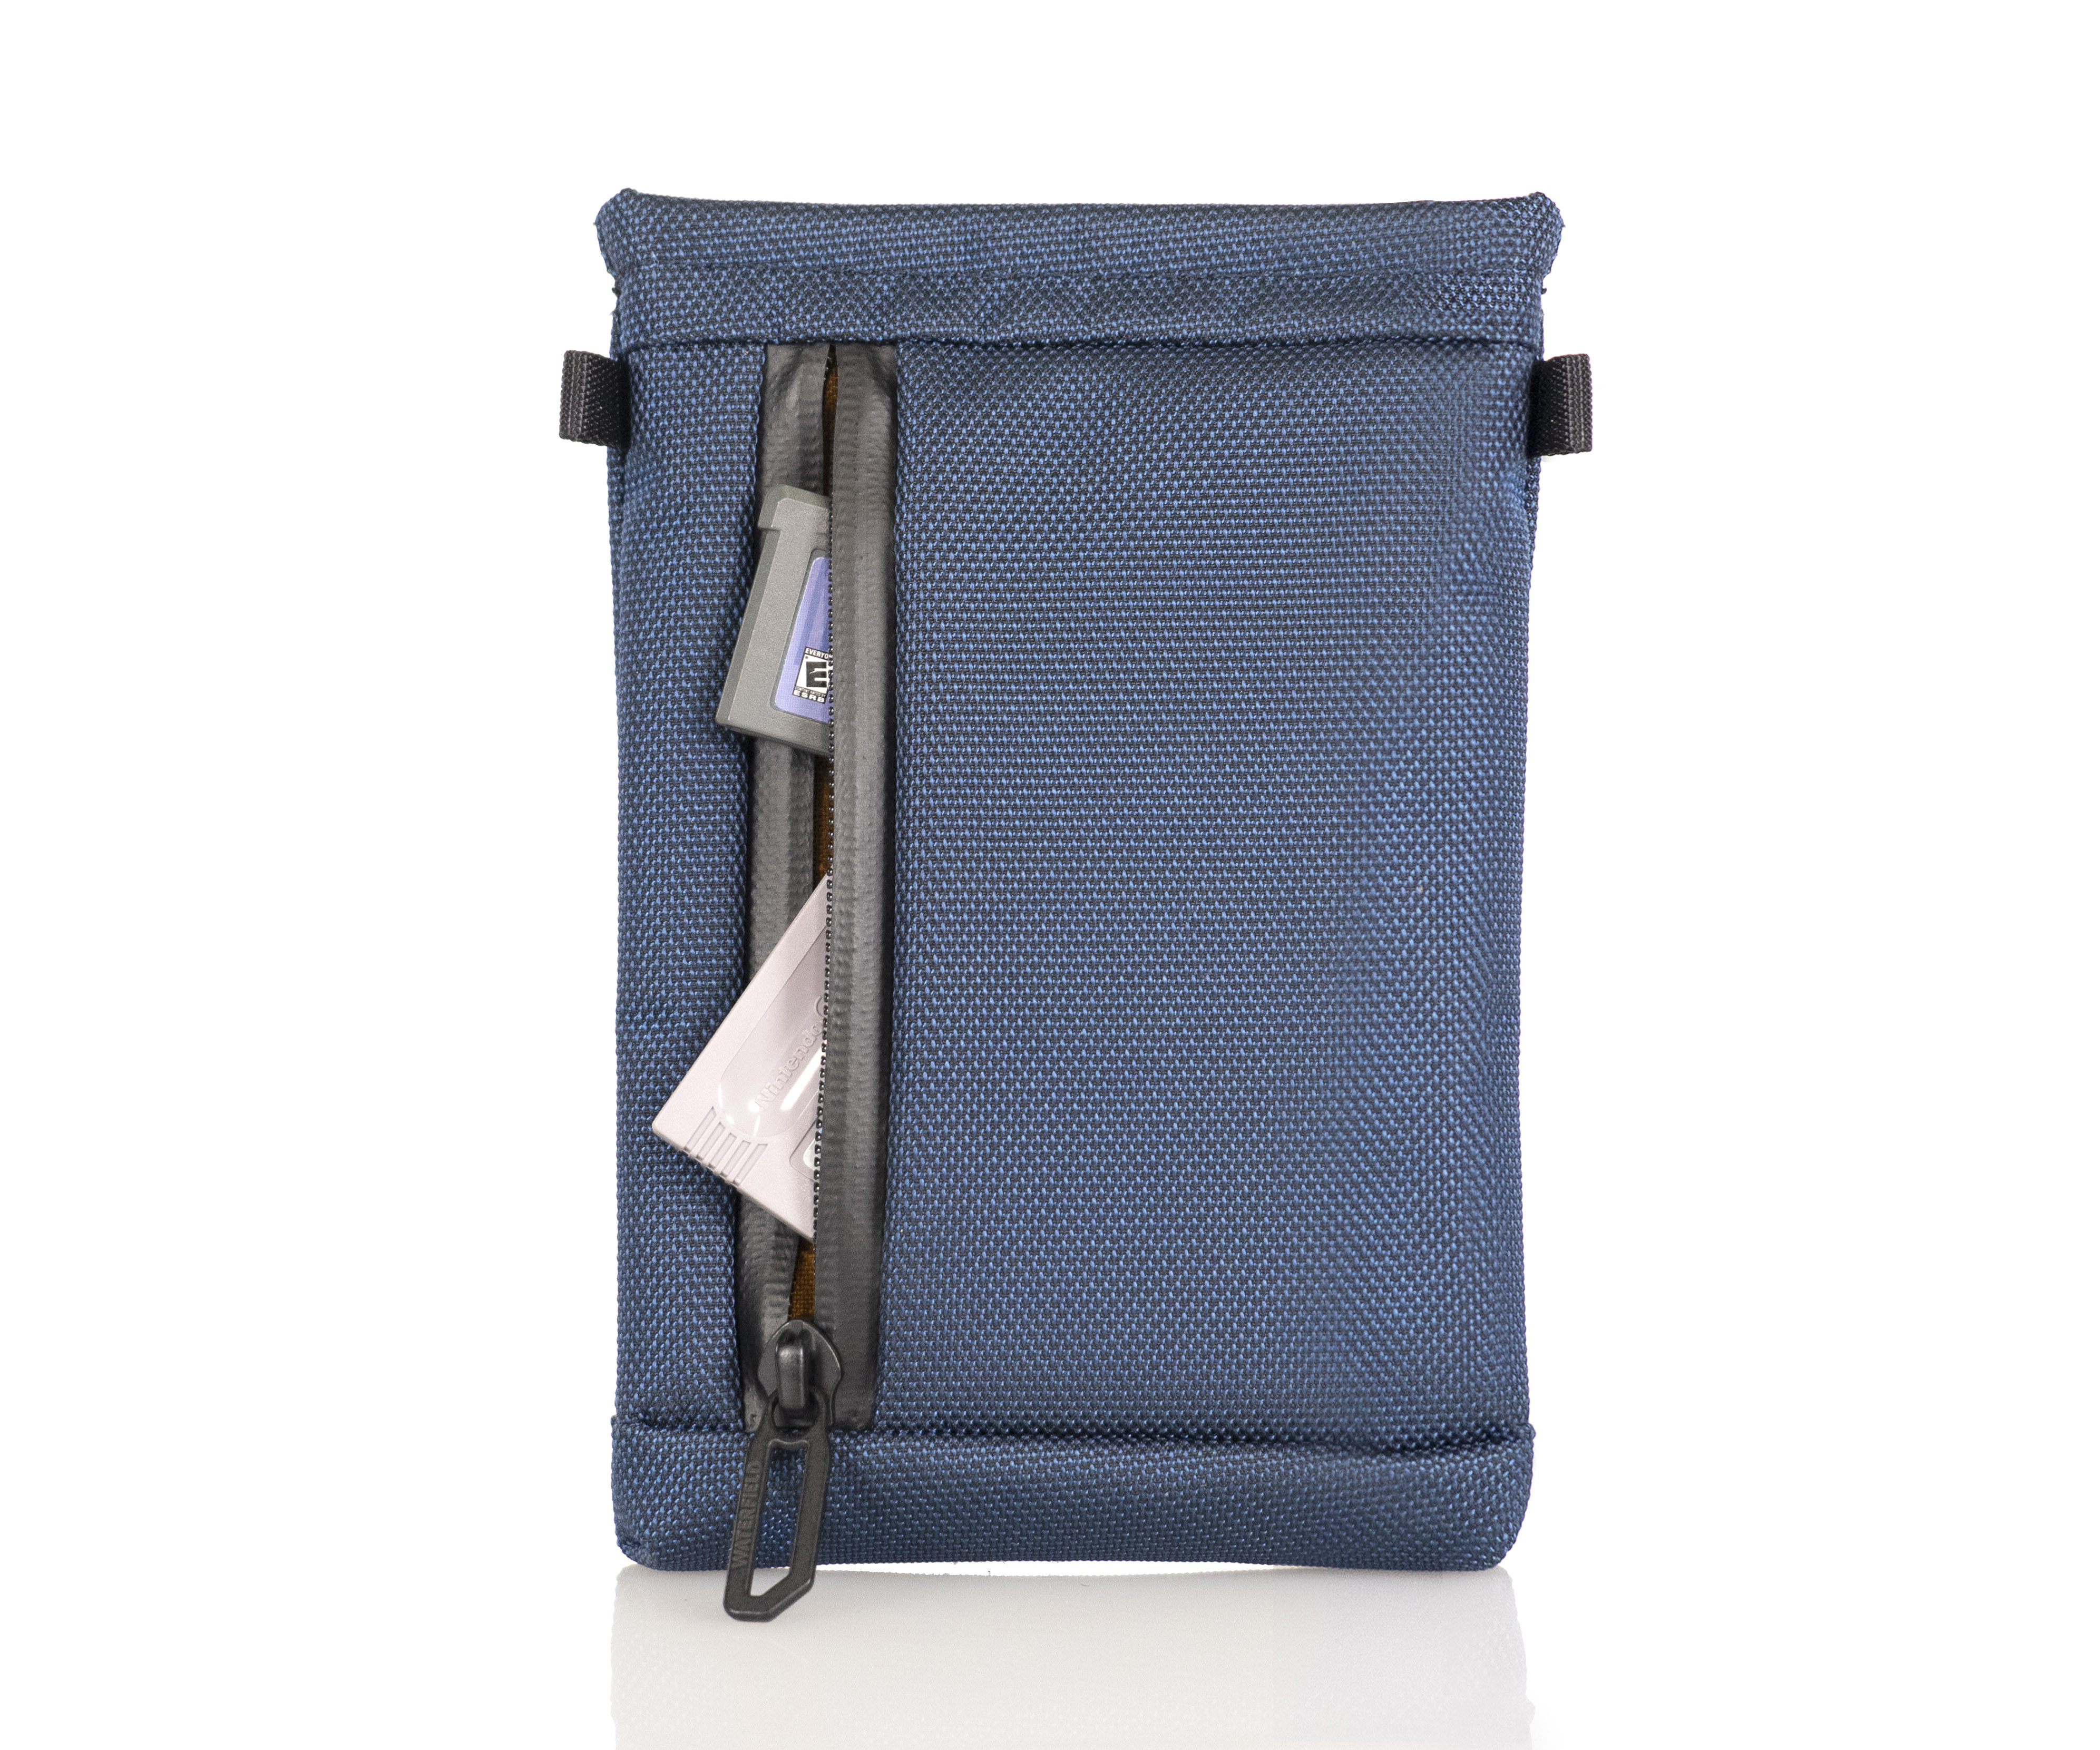 Analogue Pocket Pouch front accessory pocket